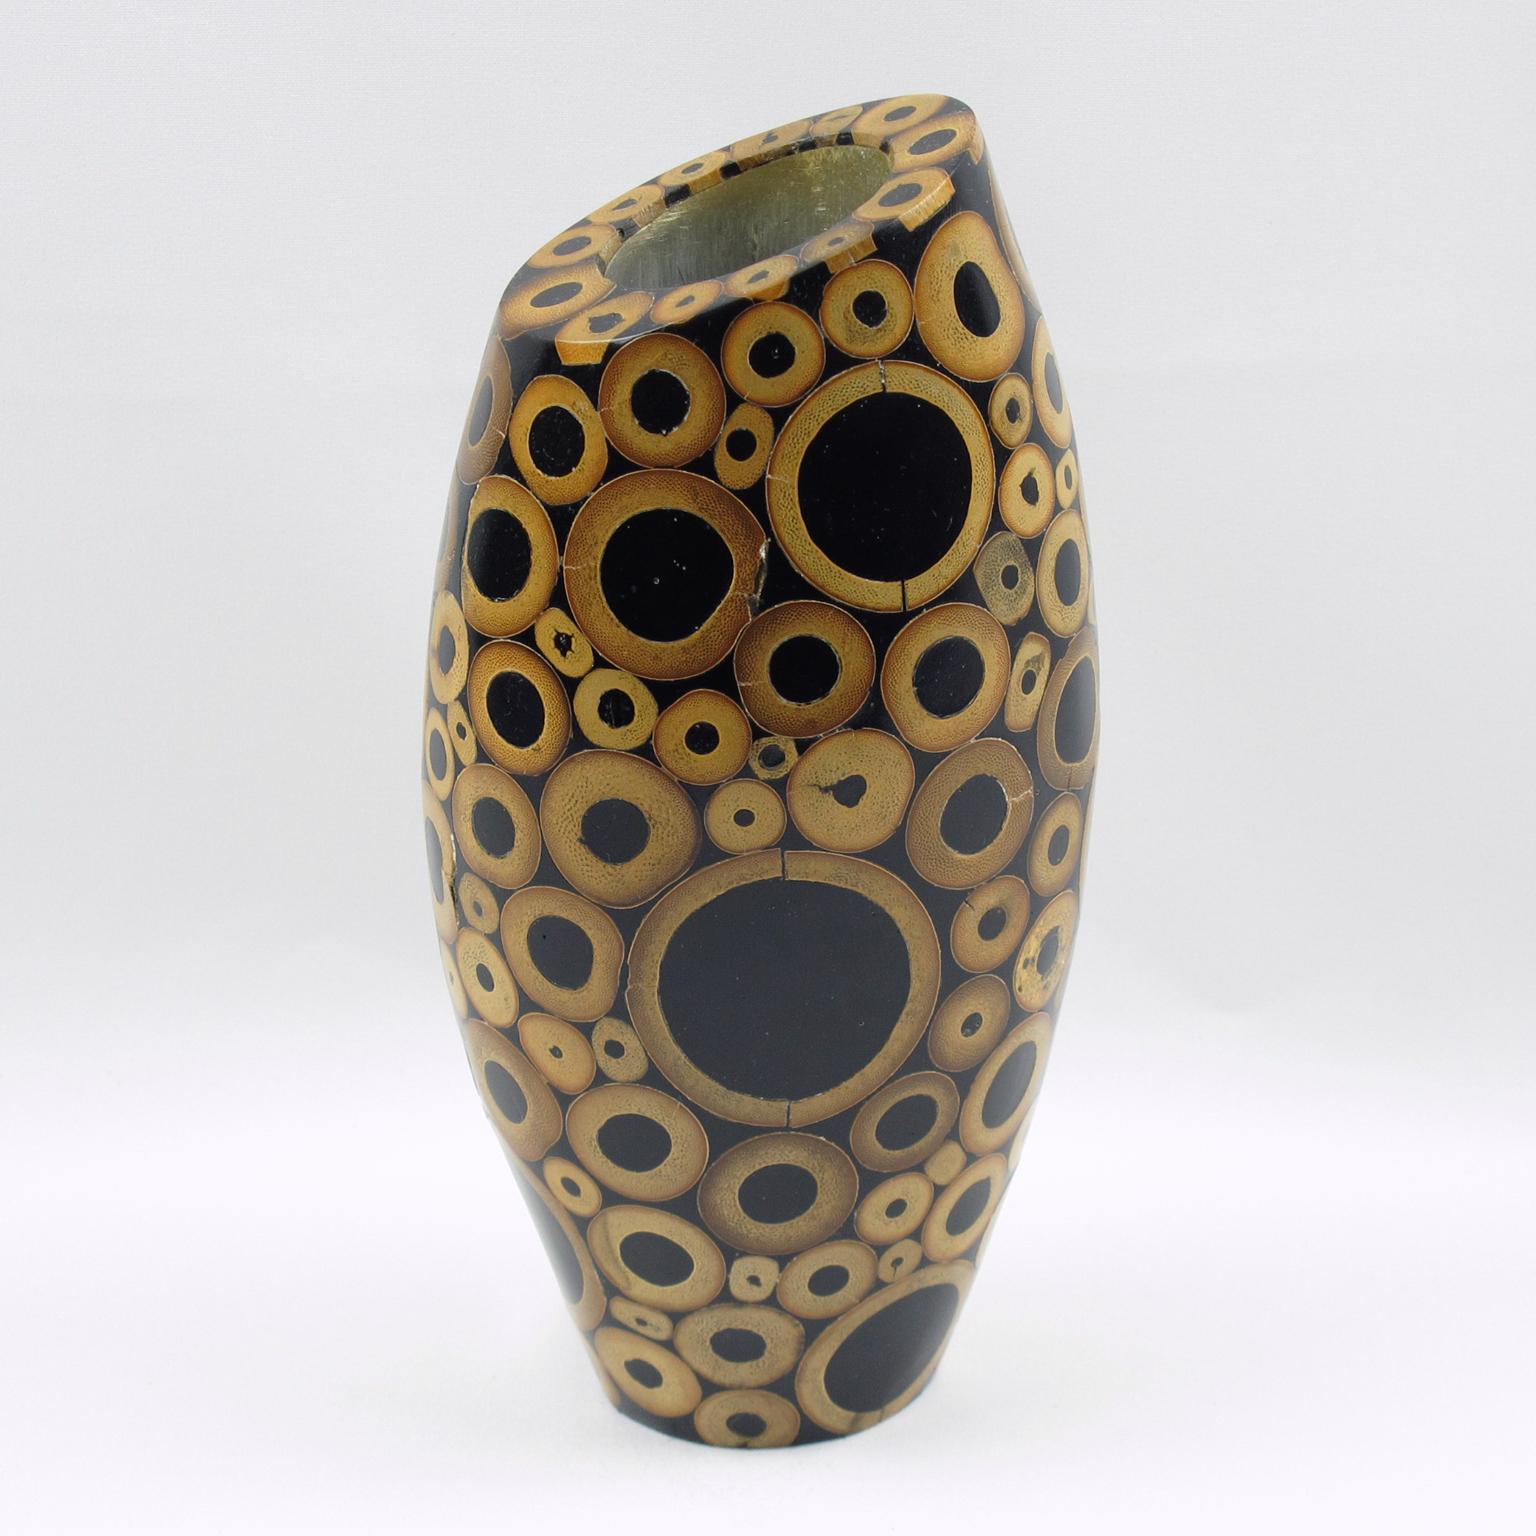 Lovely curved sculptural vase with wood and bamboo inlaid marquetry designed and produced by famed decorative arts design firm Ria & Youri Augousti, Paris. An early piece from the 1990s. Marked underside: 